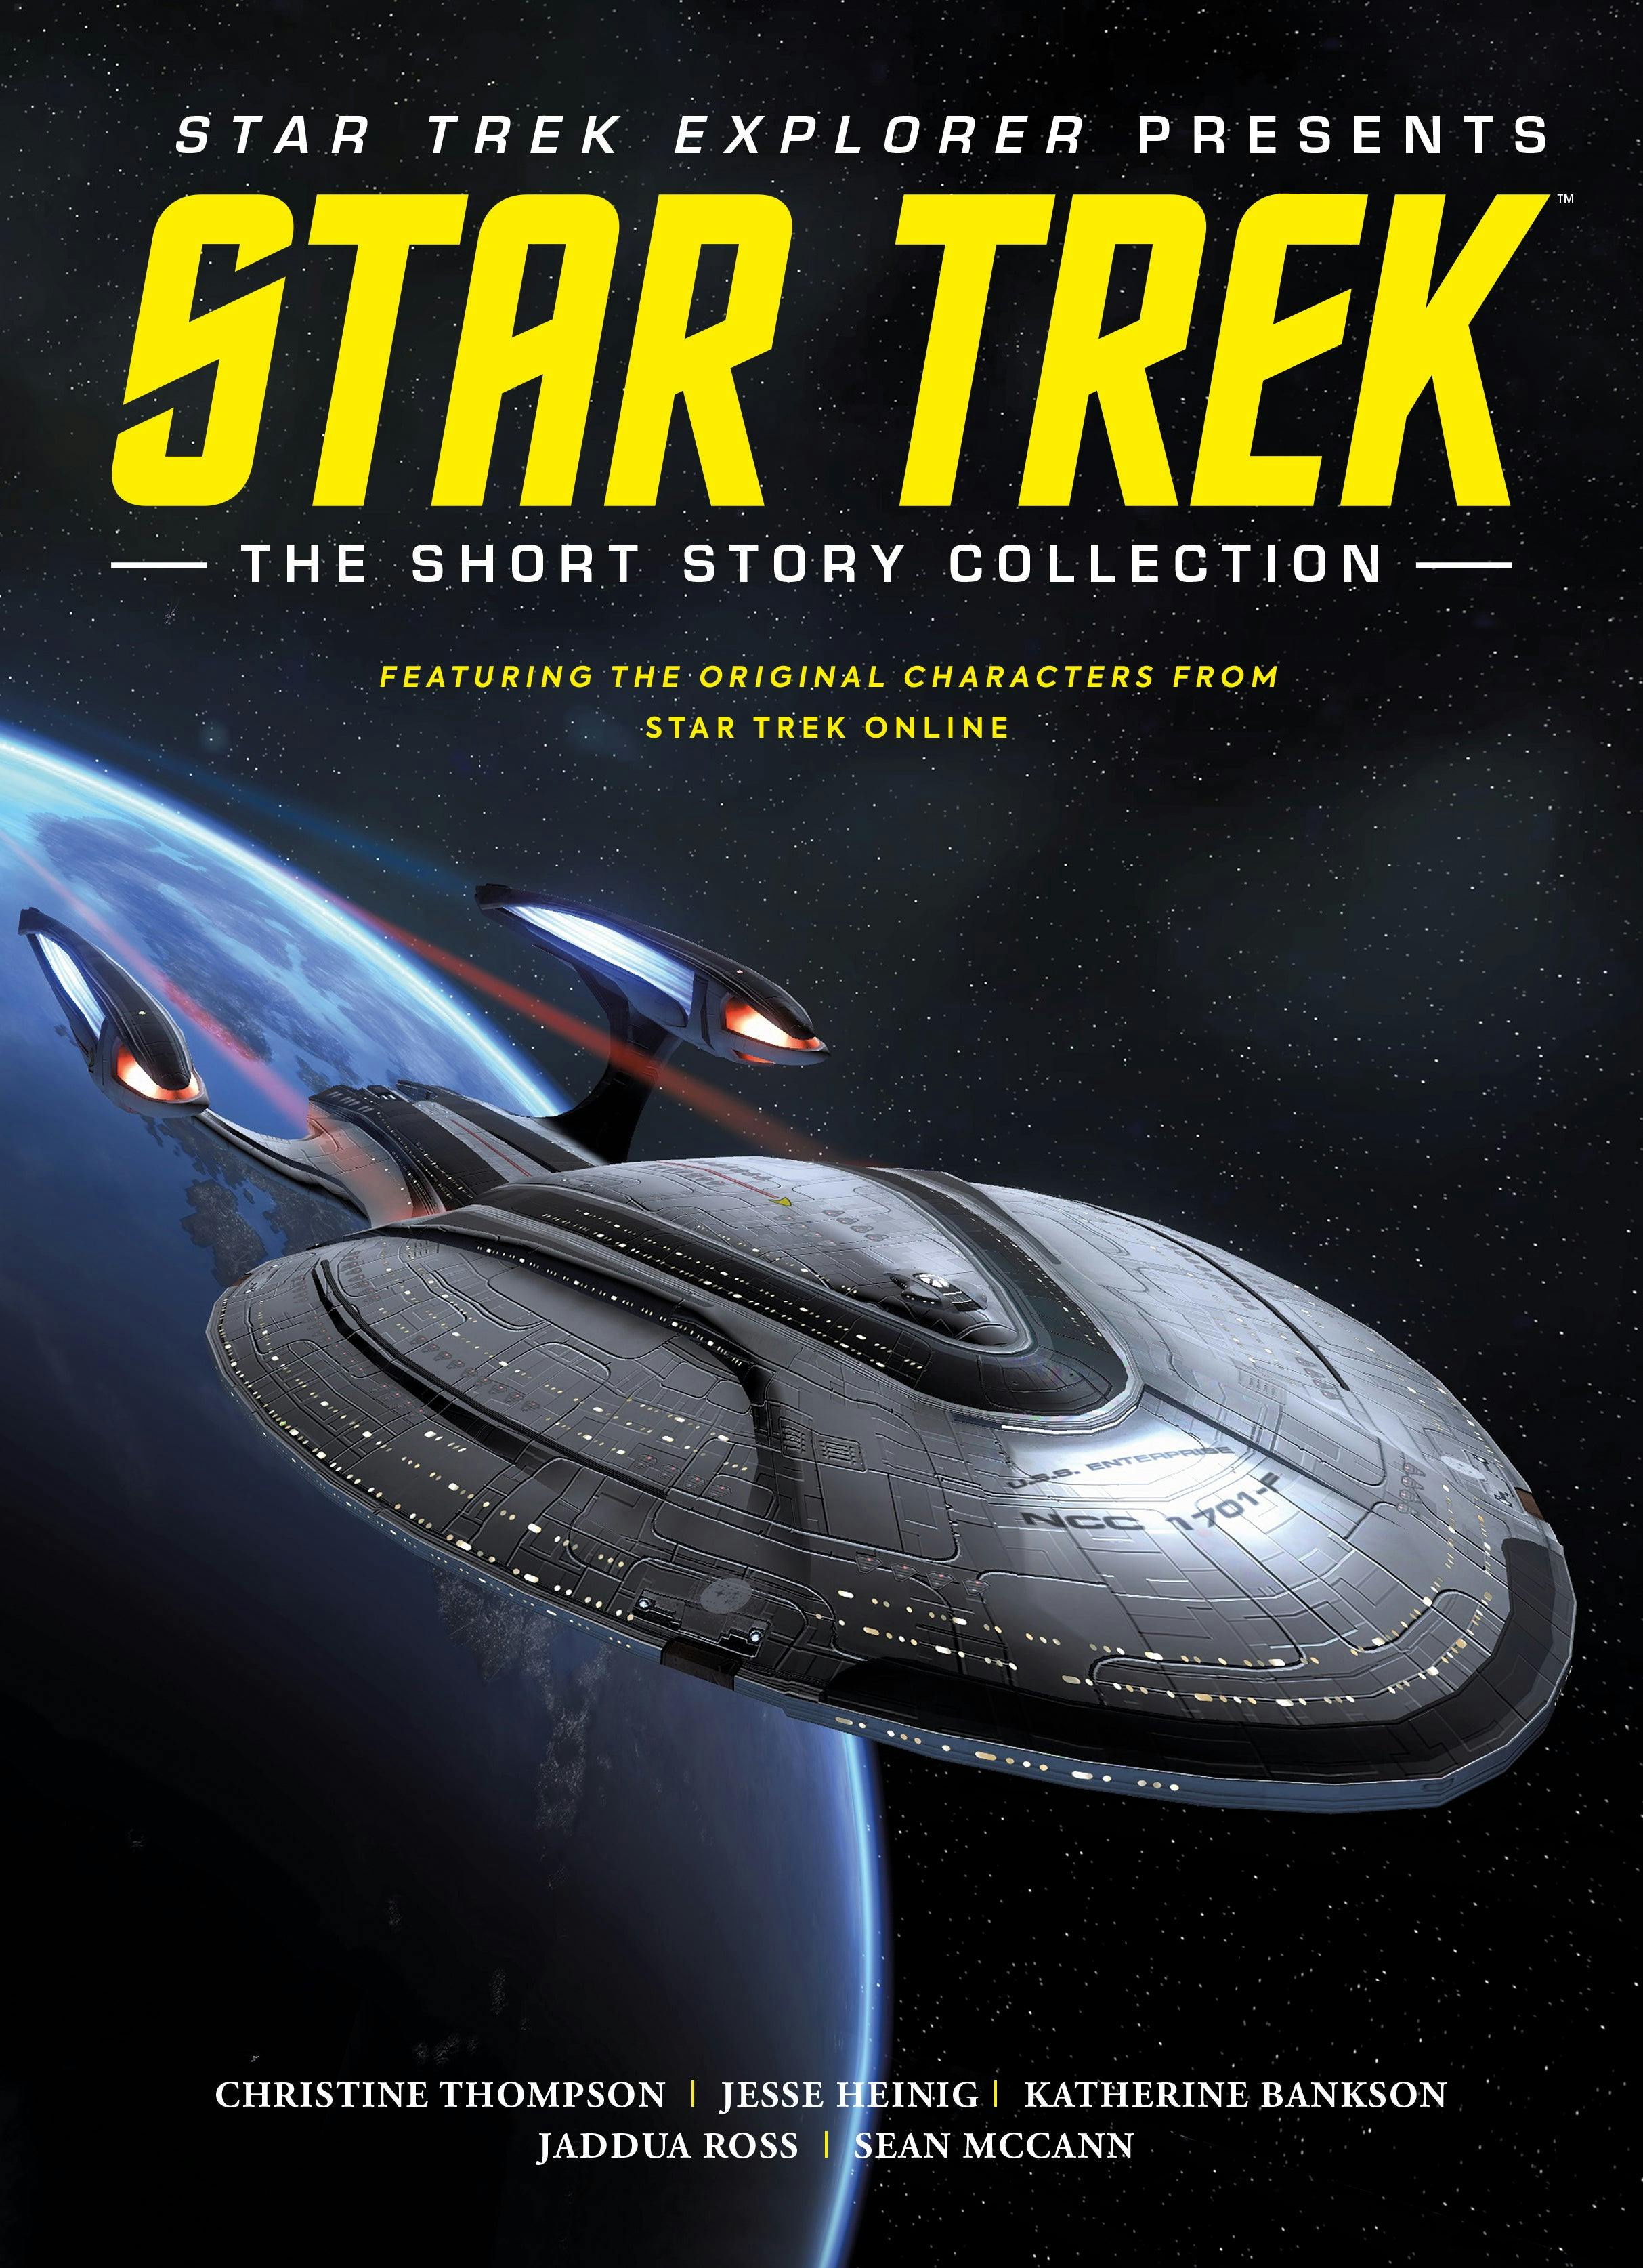 Cover image of the hardcover of Star Trek: The Short Story Collection with the U.S.S. Enterprise featured